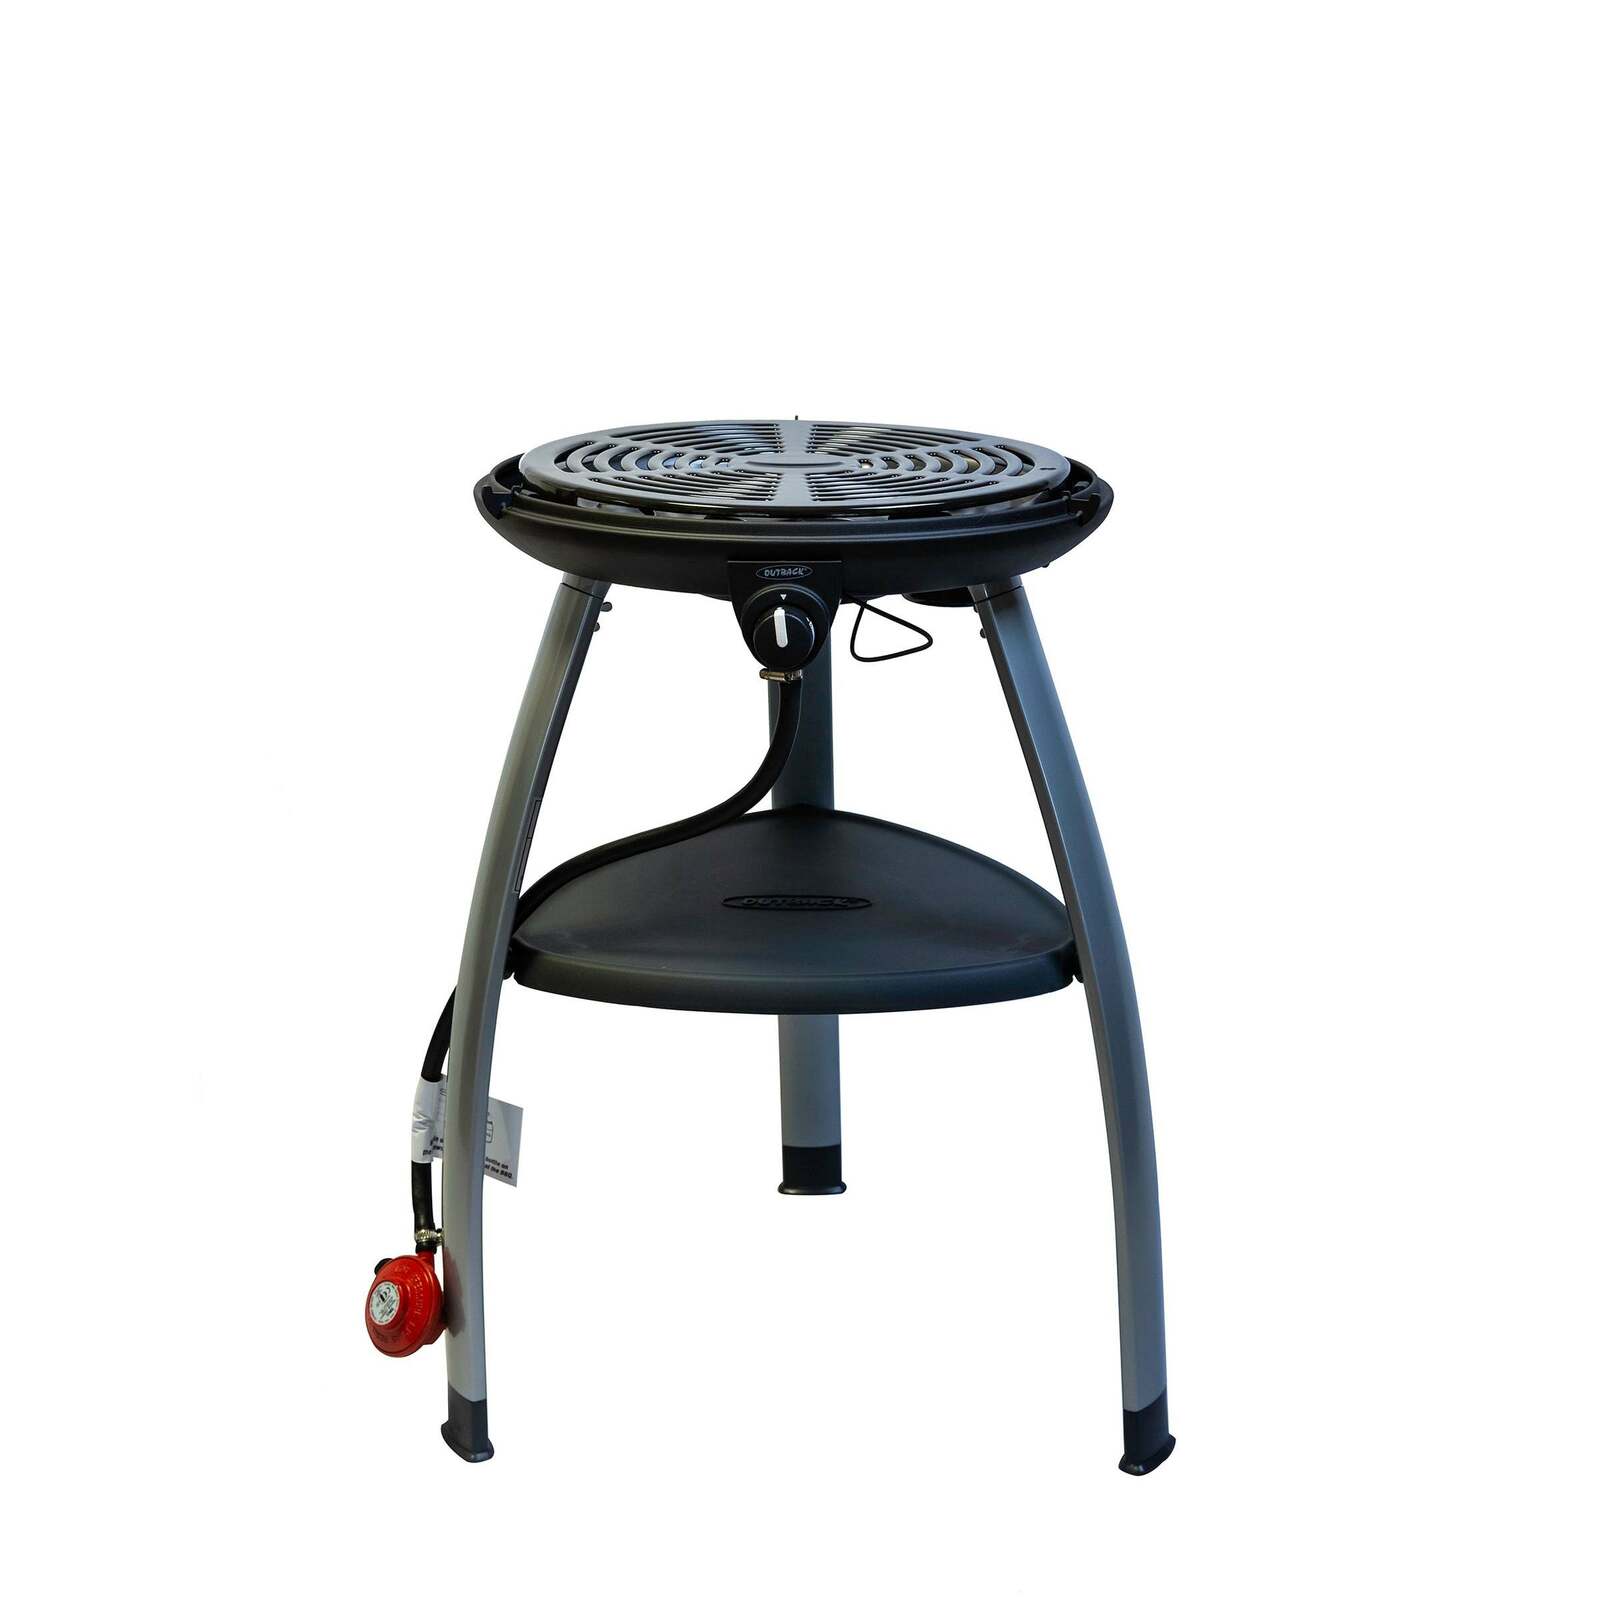 Outback Trekker Portable Gas BBQ - Black with lid removed